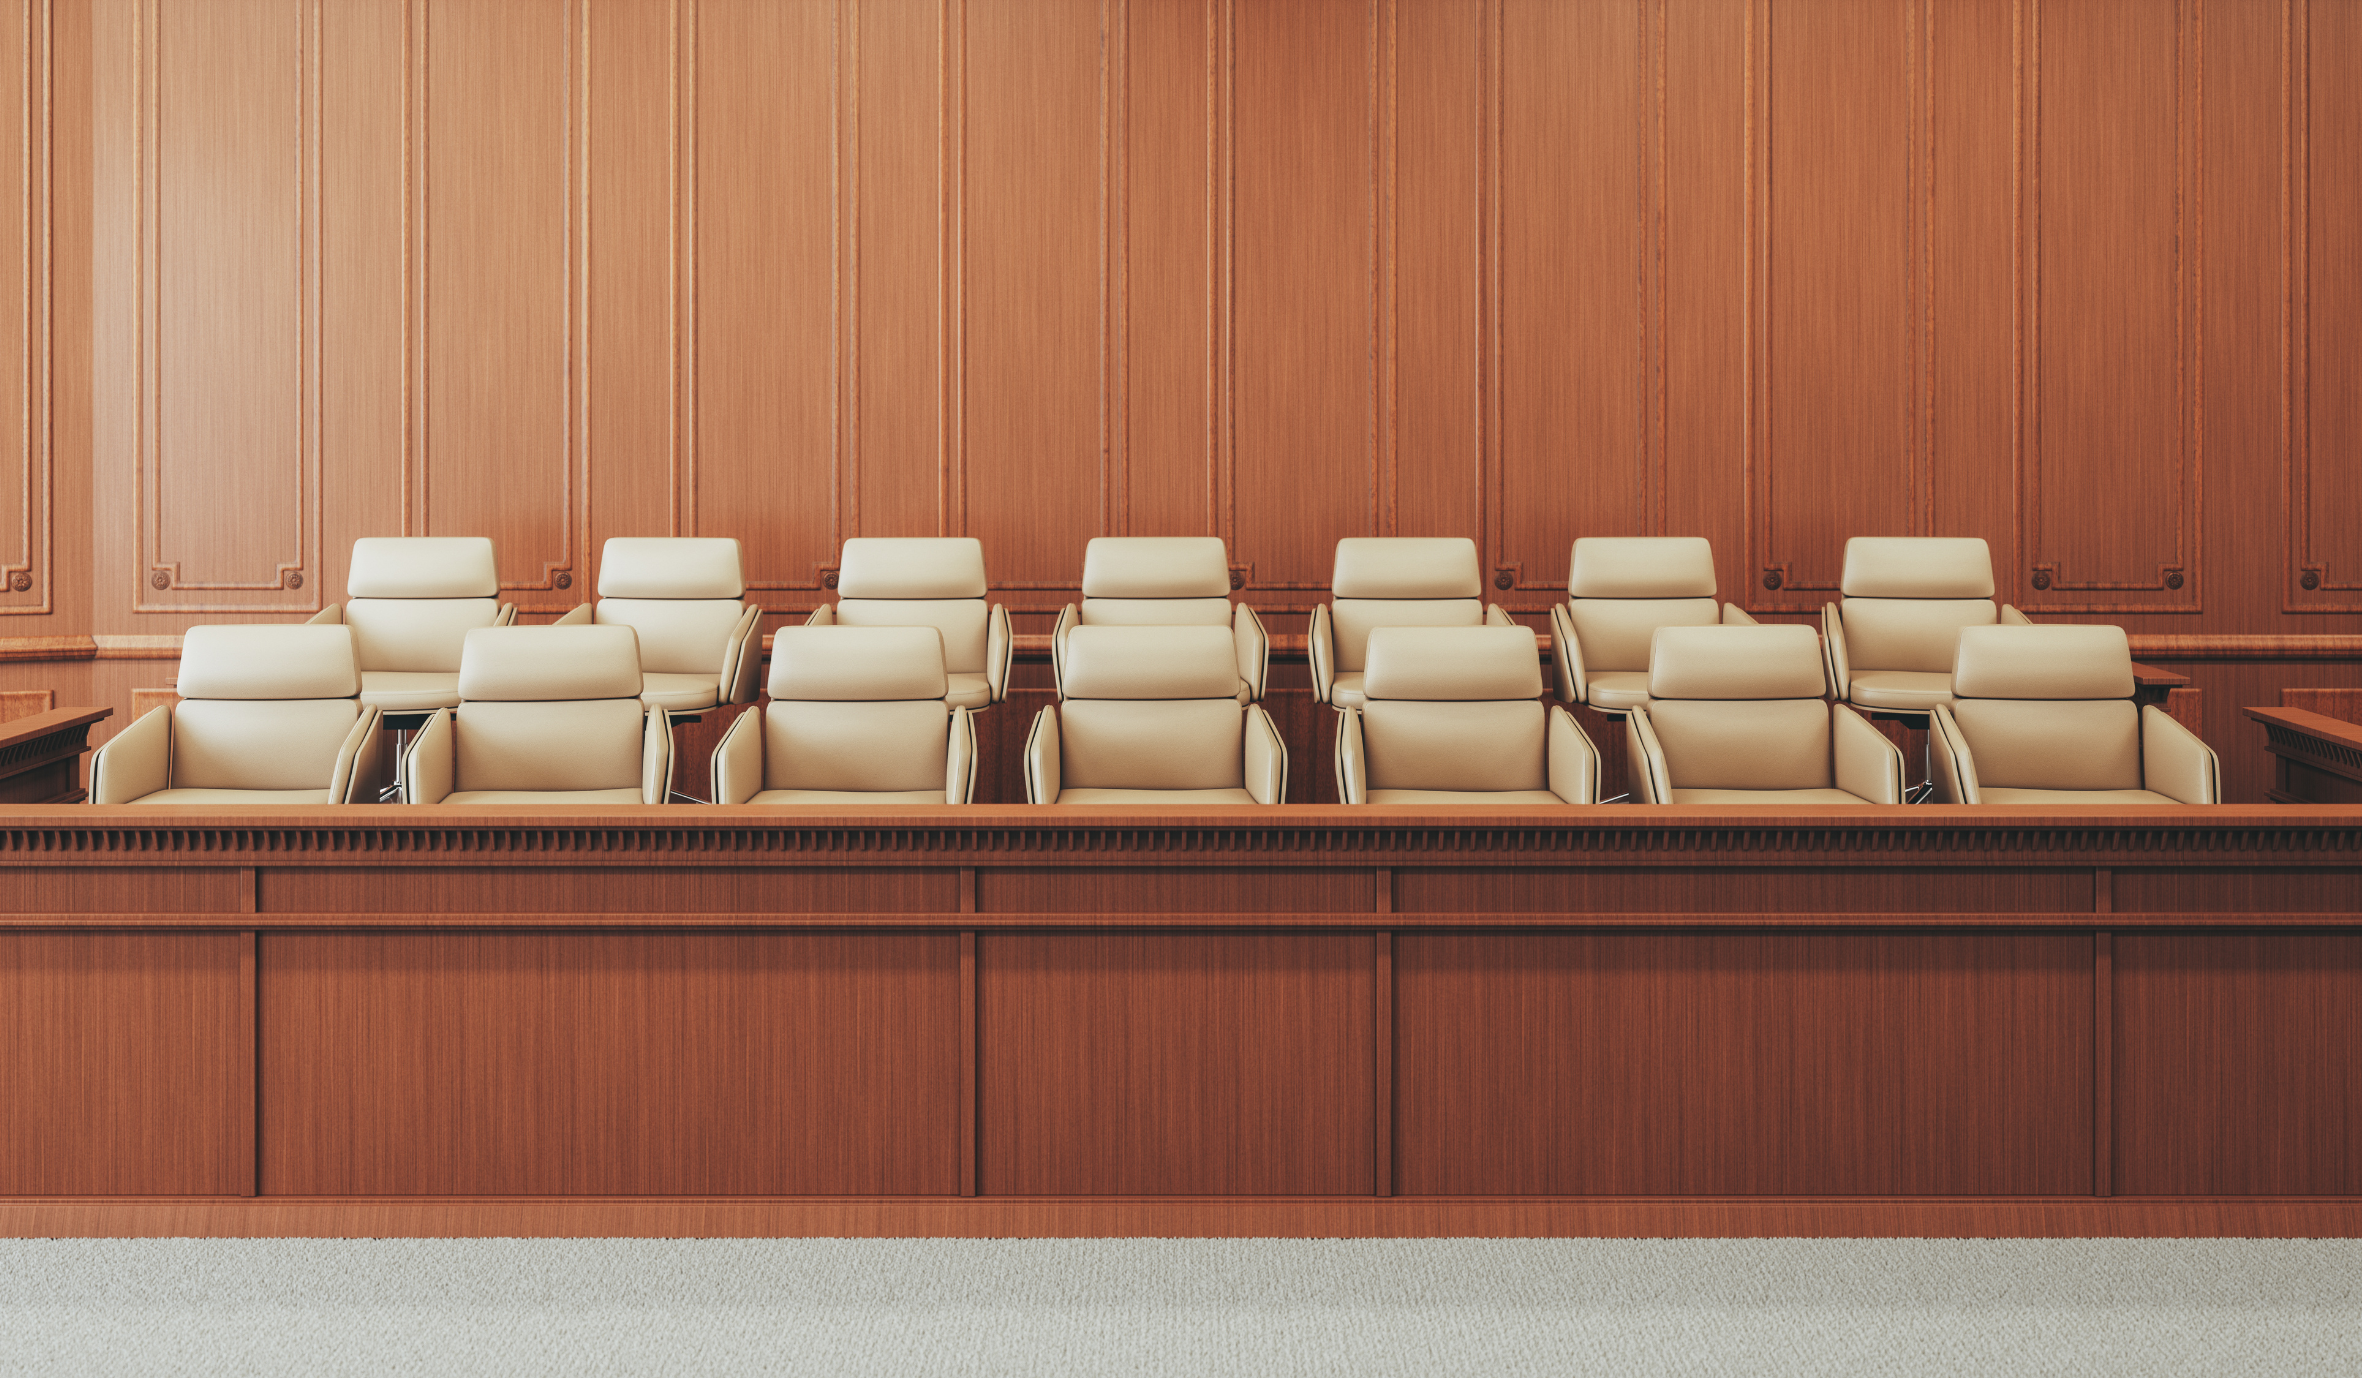 Do Employers Need to Pay for Jury Duty?